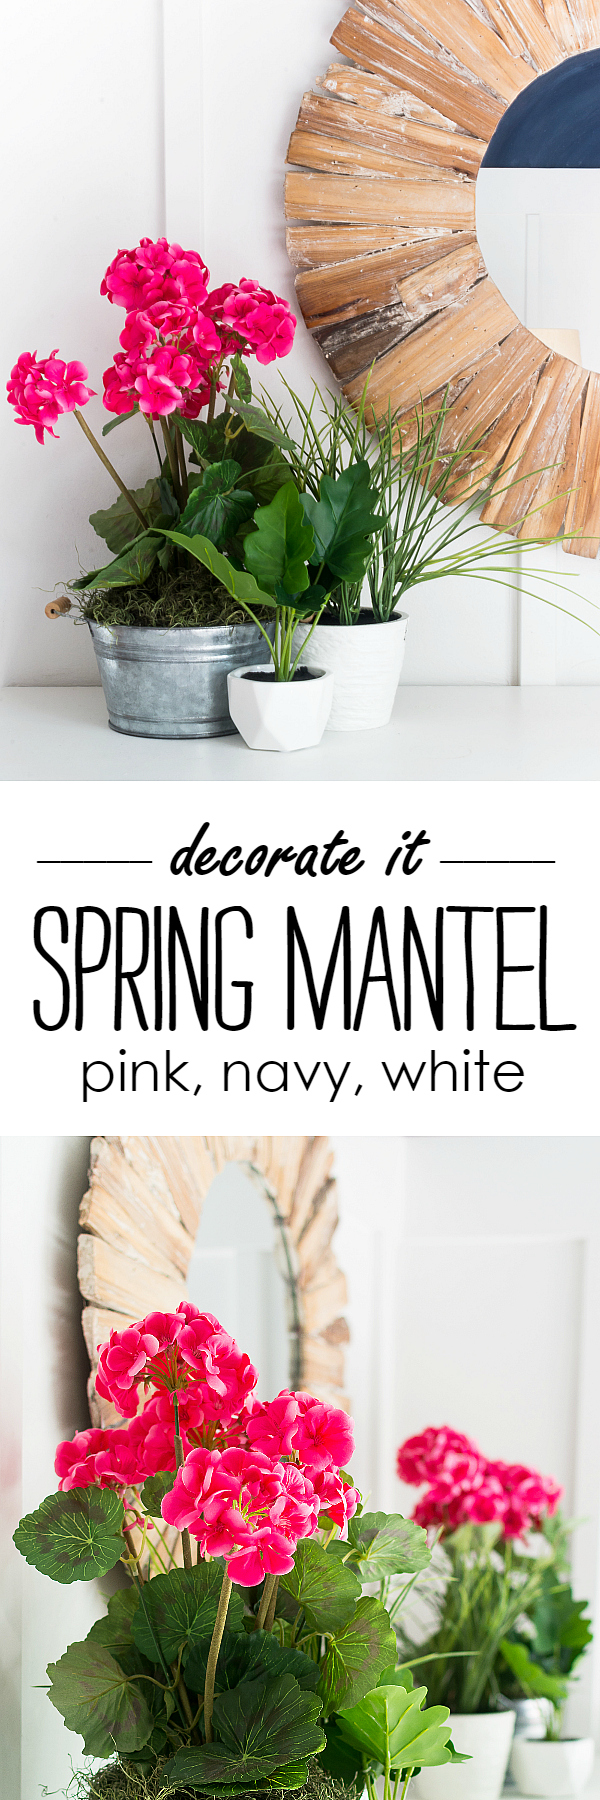 Spring Mantel Ideas in Pink and Navy